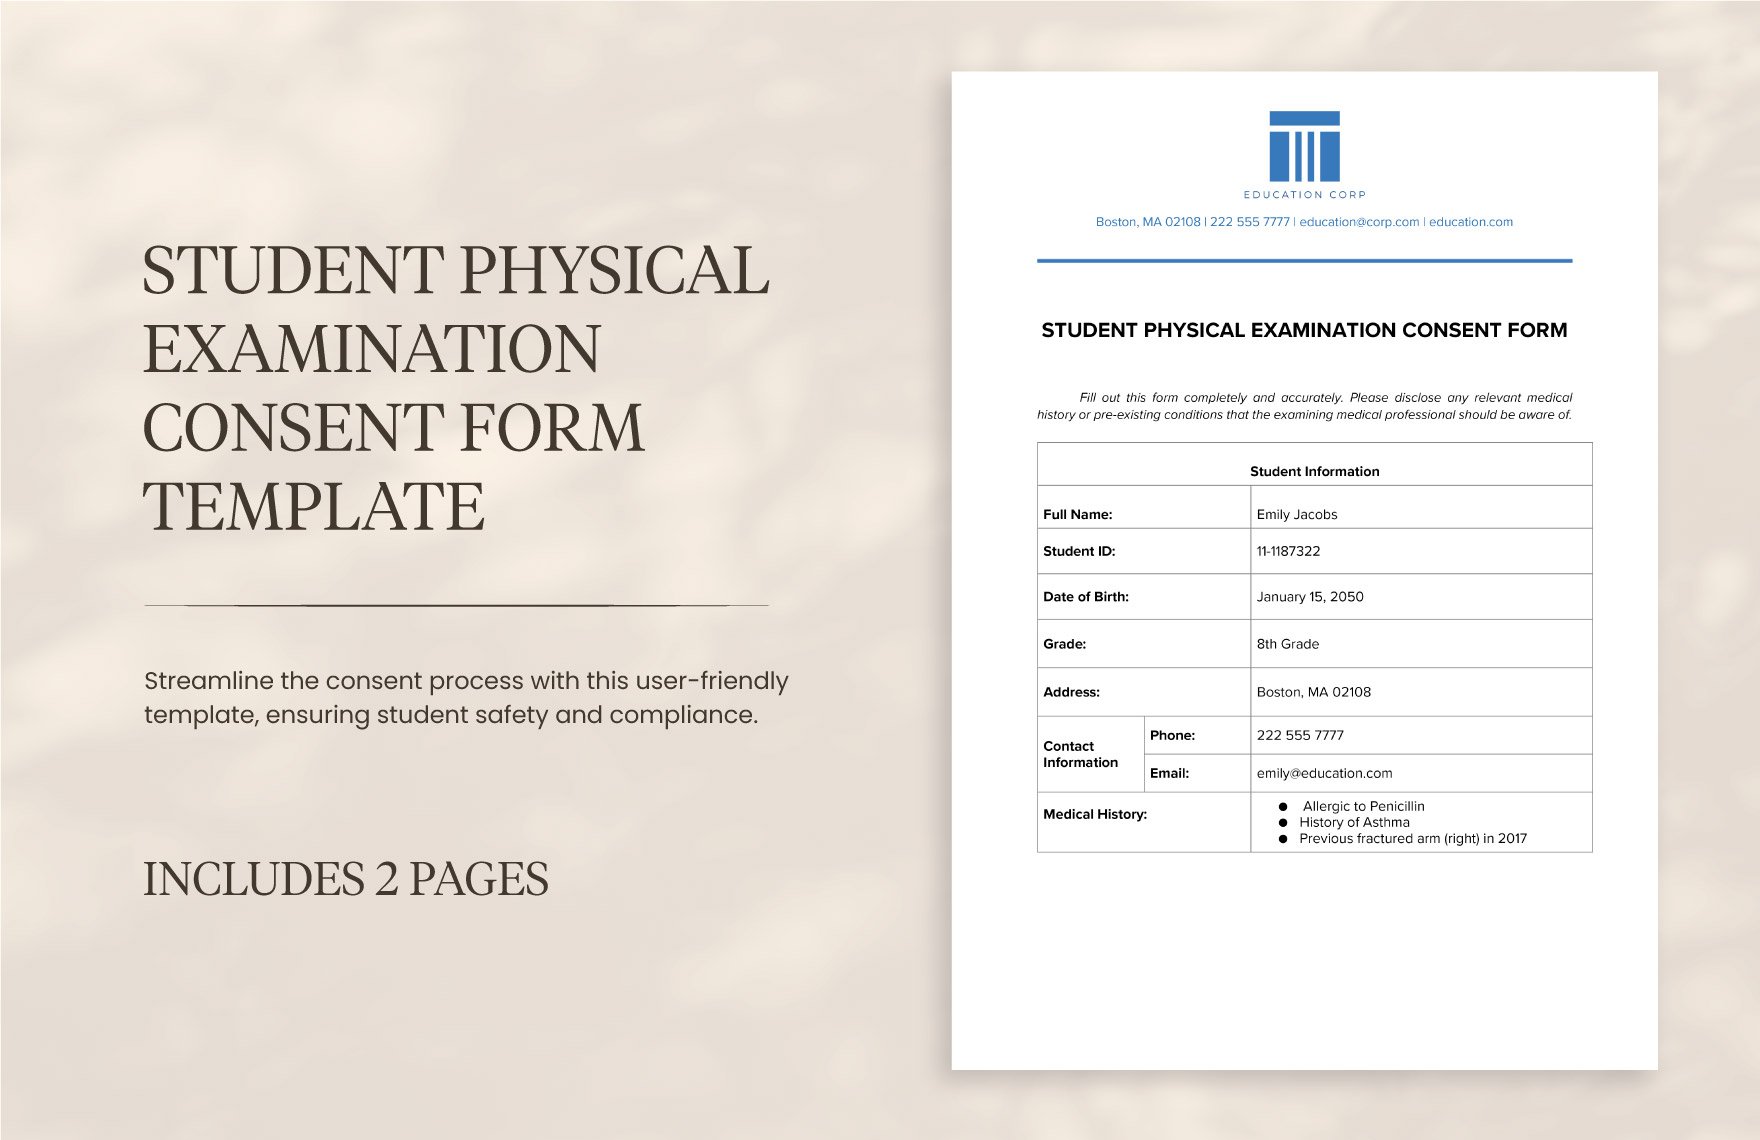 Student Physical Examination Consent Form Template